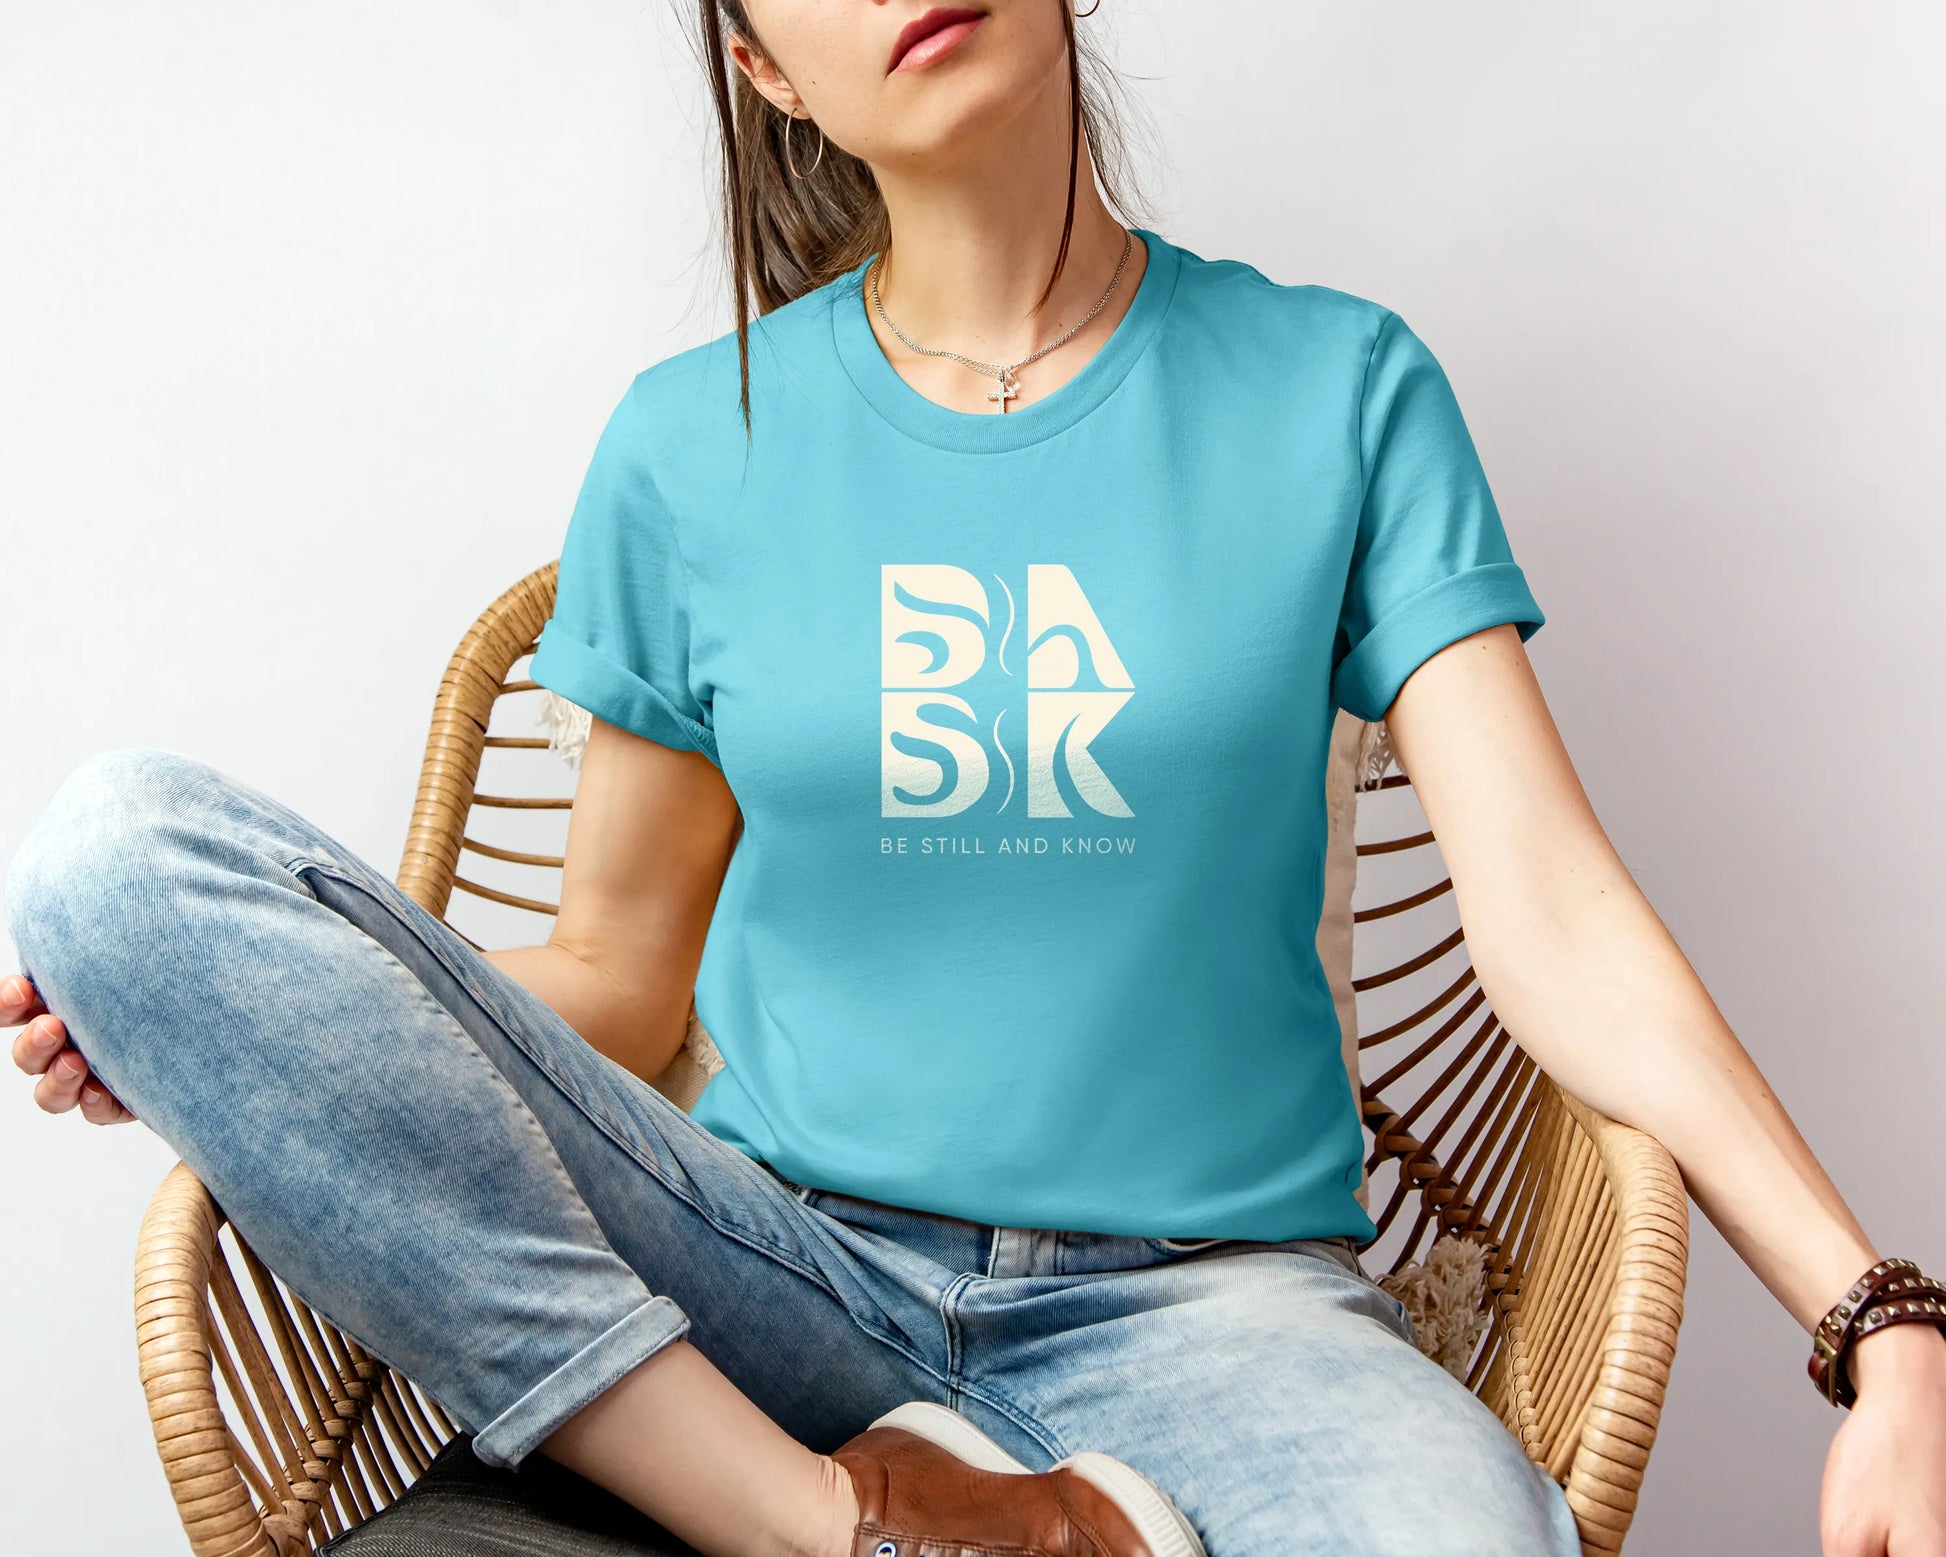 A woman sitting in a chair wearing a blue t-shirt with the Be Still and Know Logo.